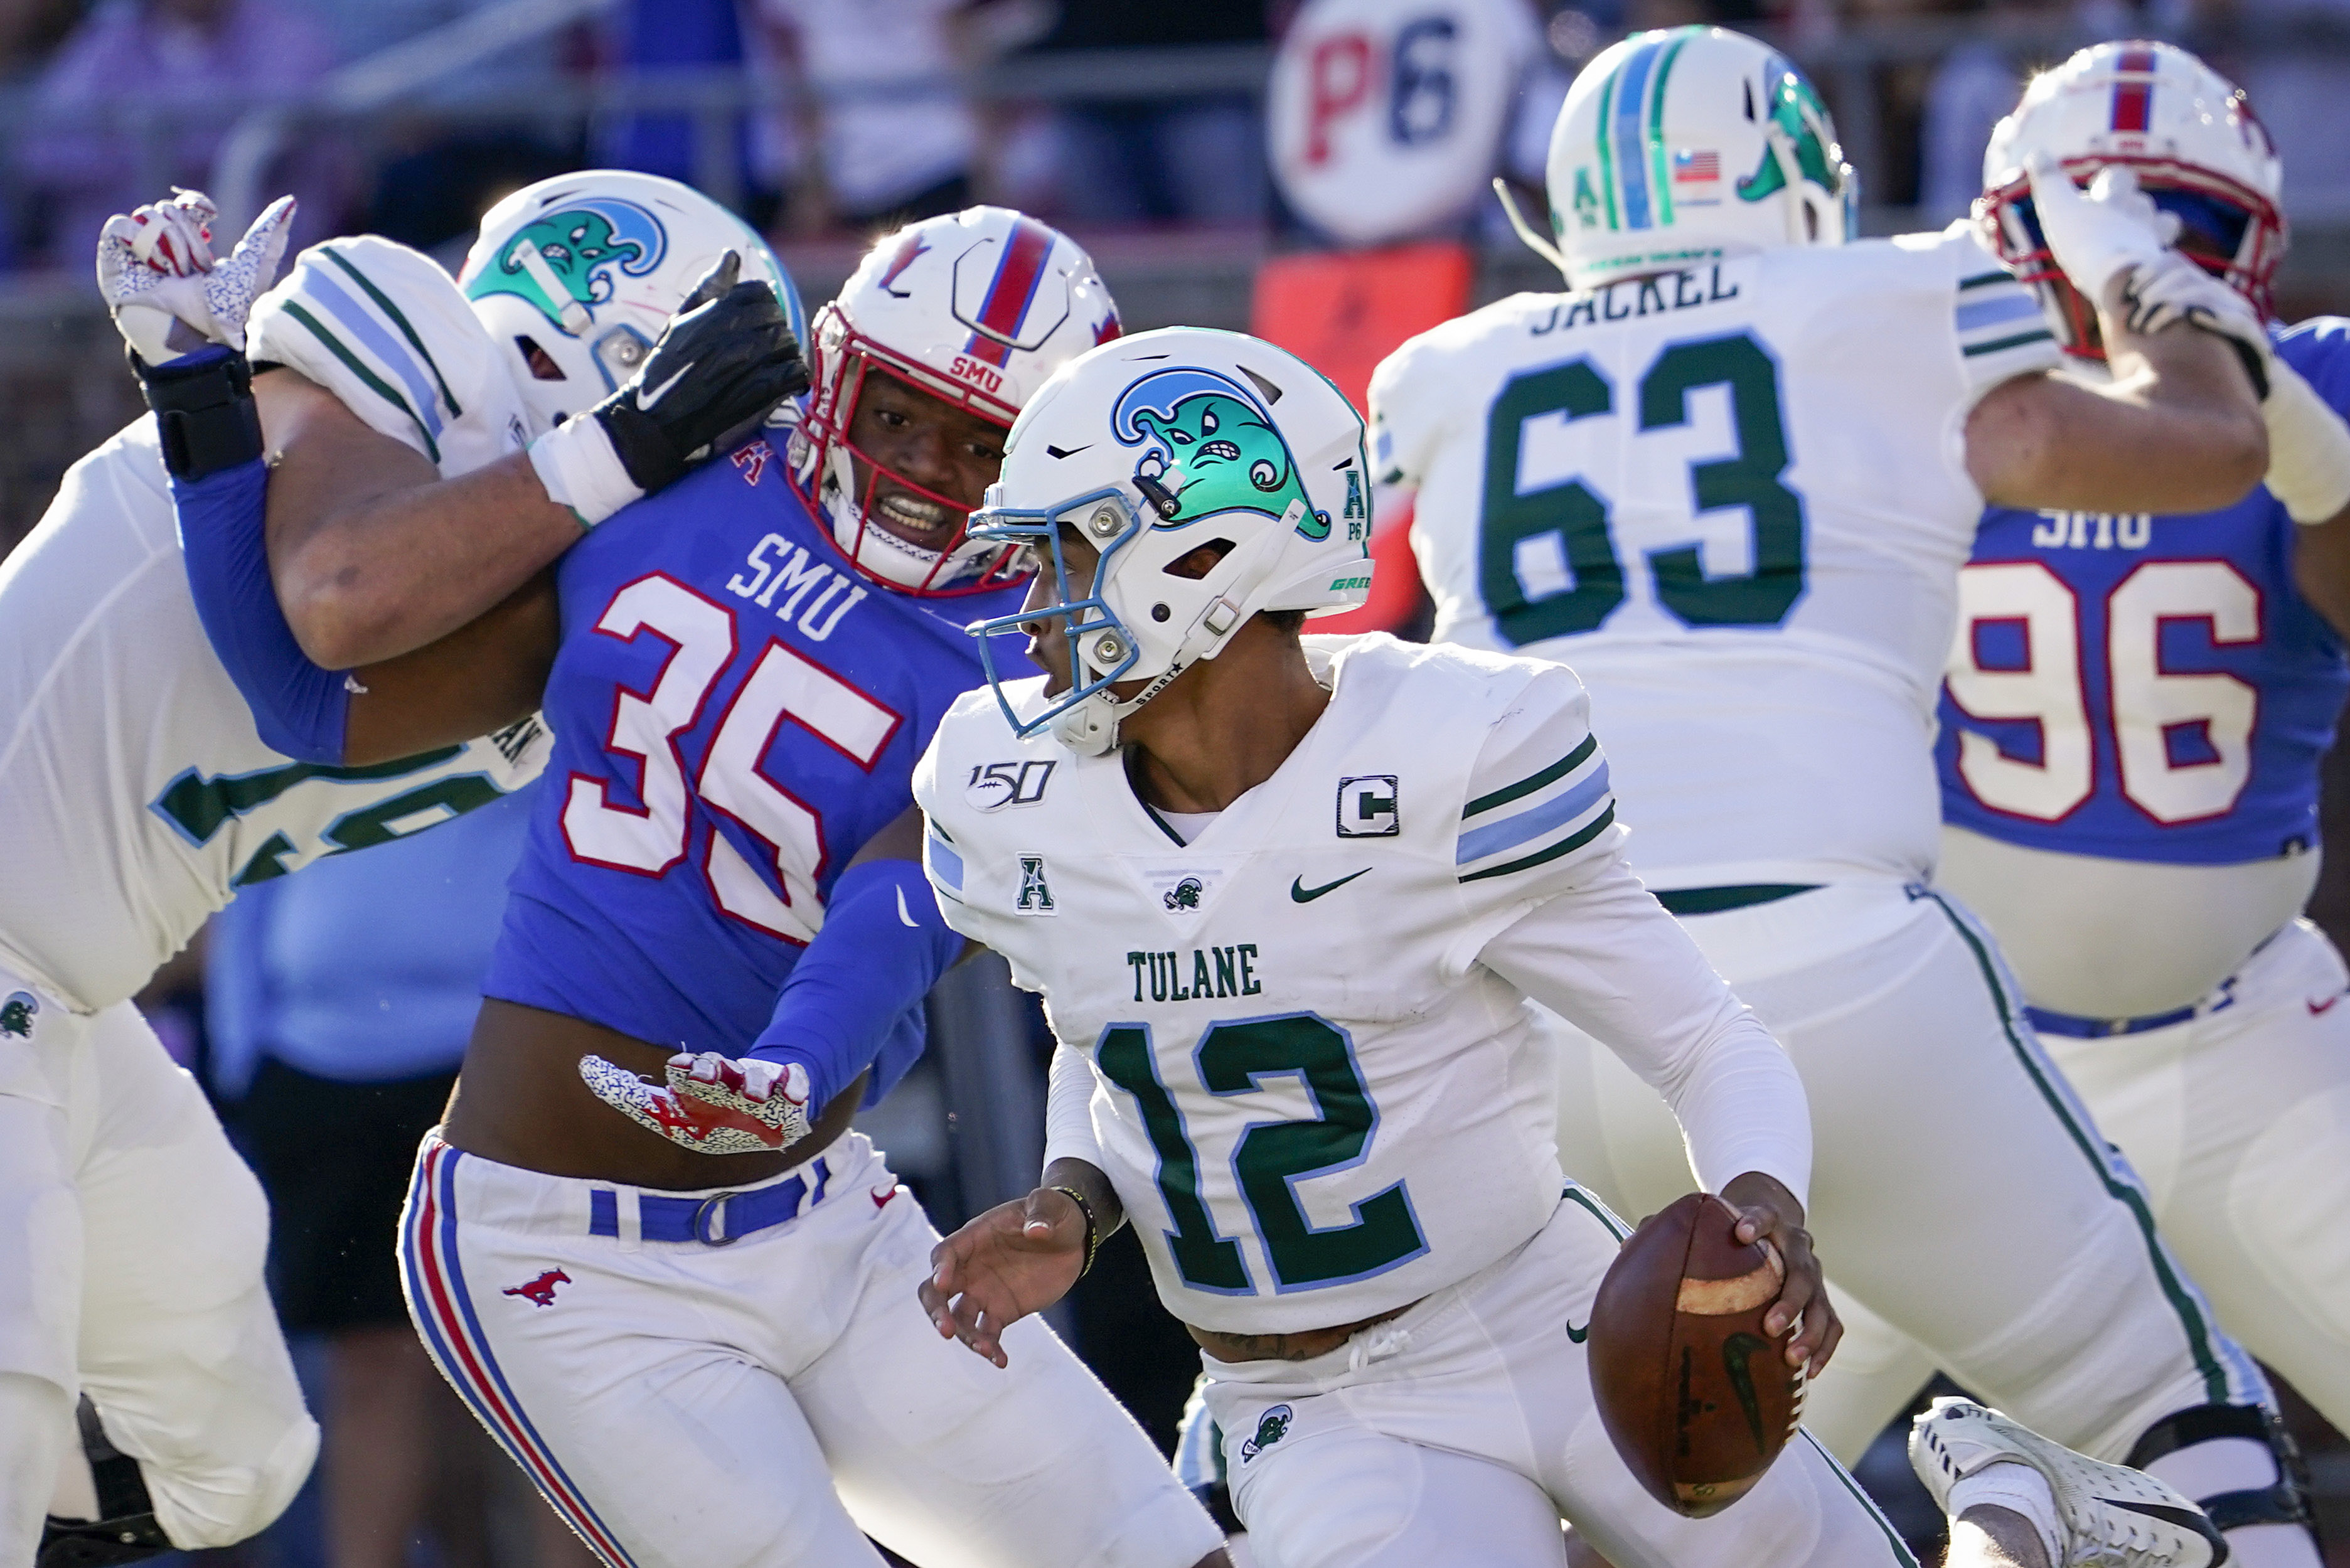 College football picks (Week 7): Predictions for SMU-Tulane, Texas  A&M-Mississippi St. and key national matchups